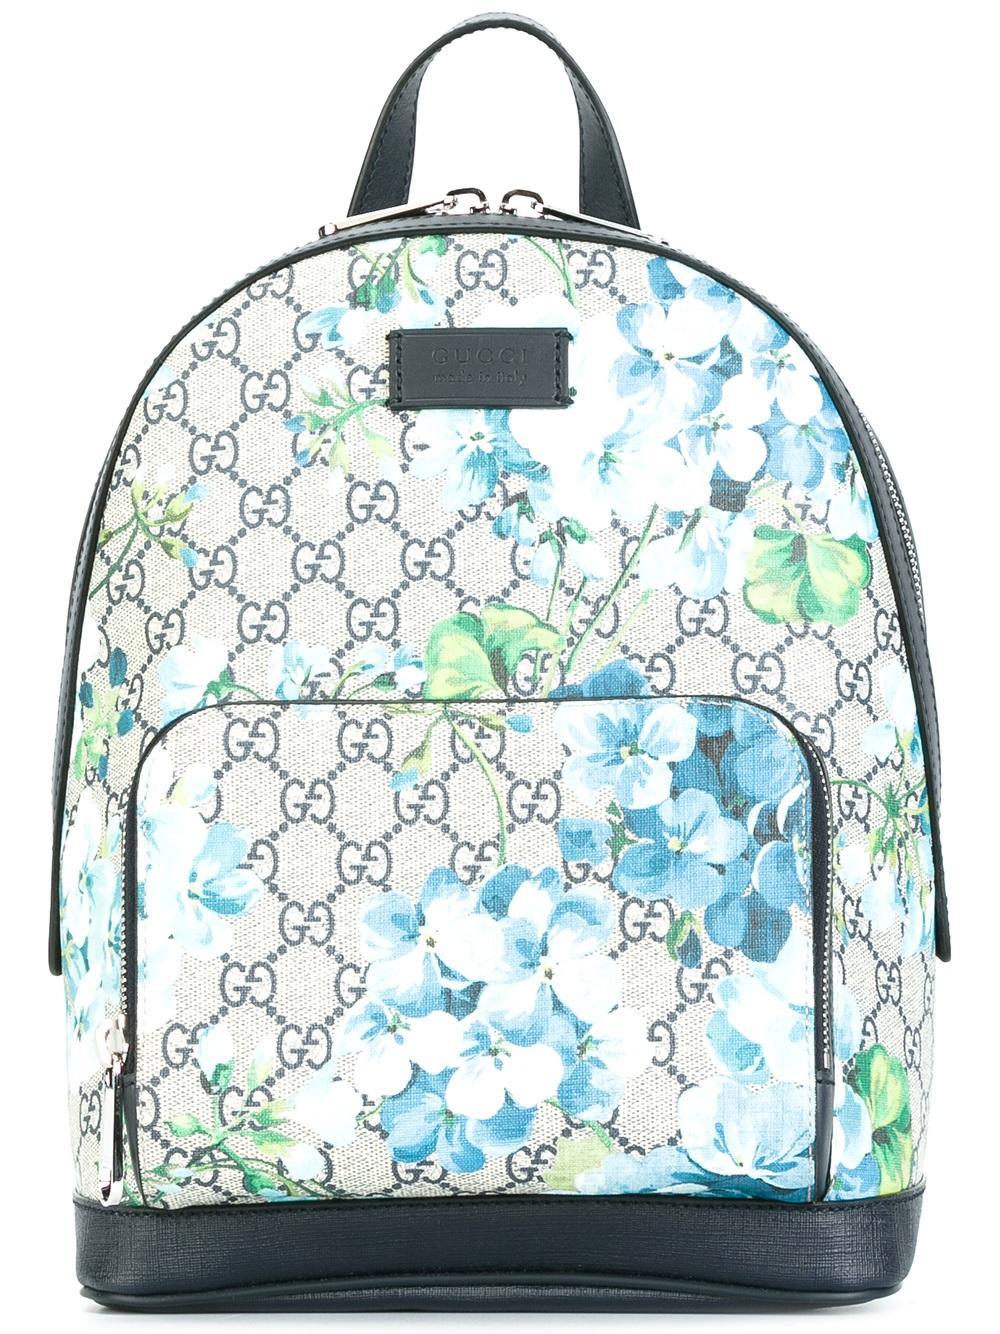 Lyst - Gucci Gg Blooms Supreme Small Backpack in Blue